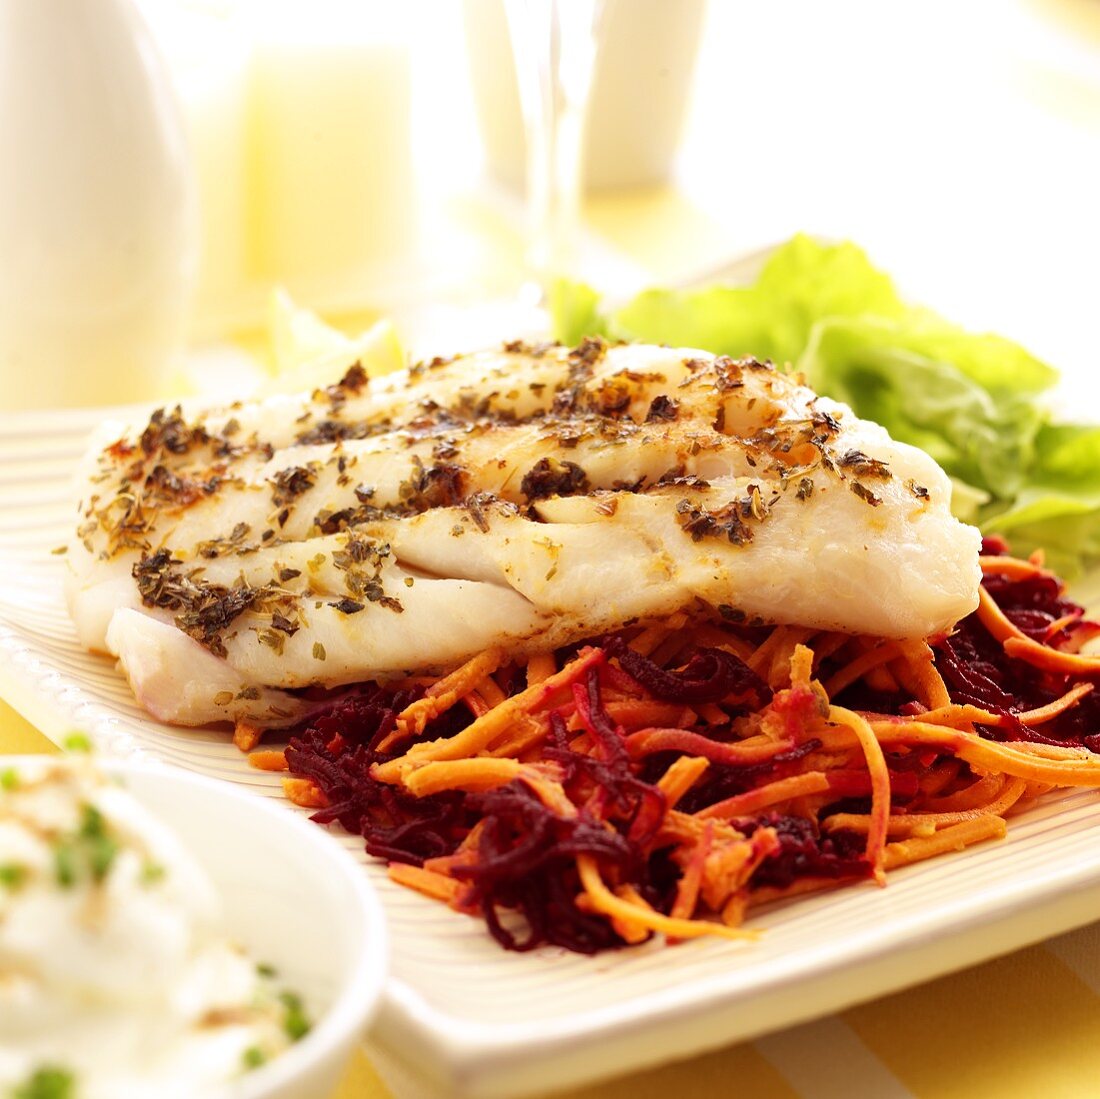 Fish fillet on beetroot and carrot salad